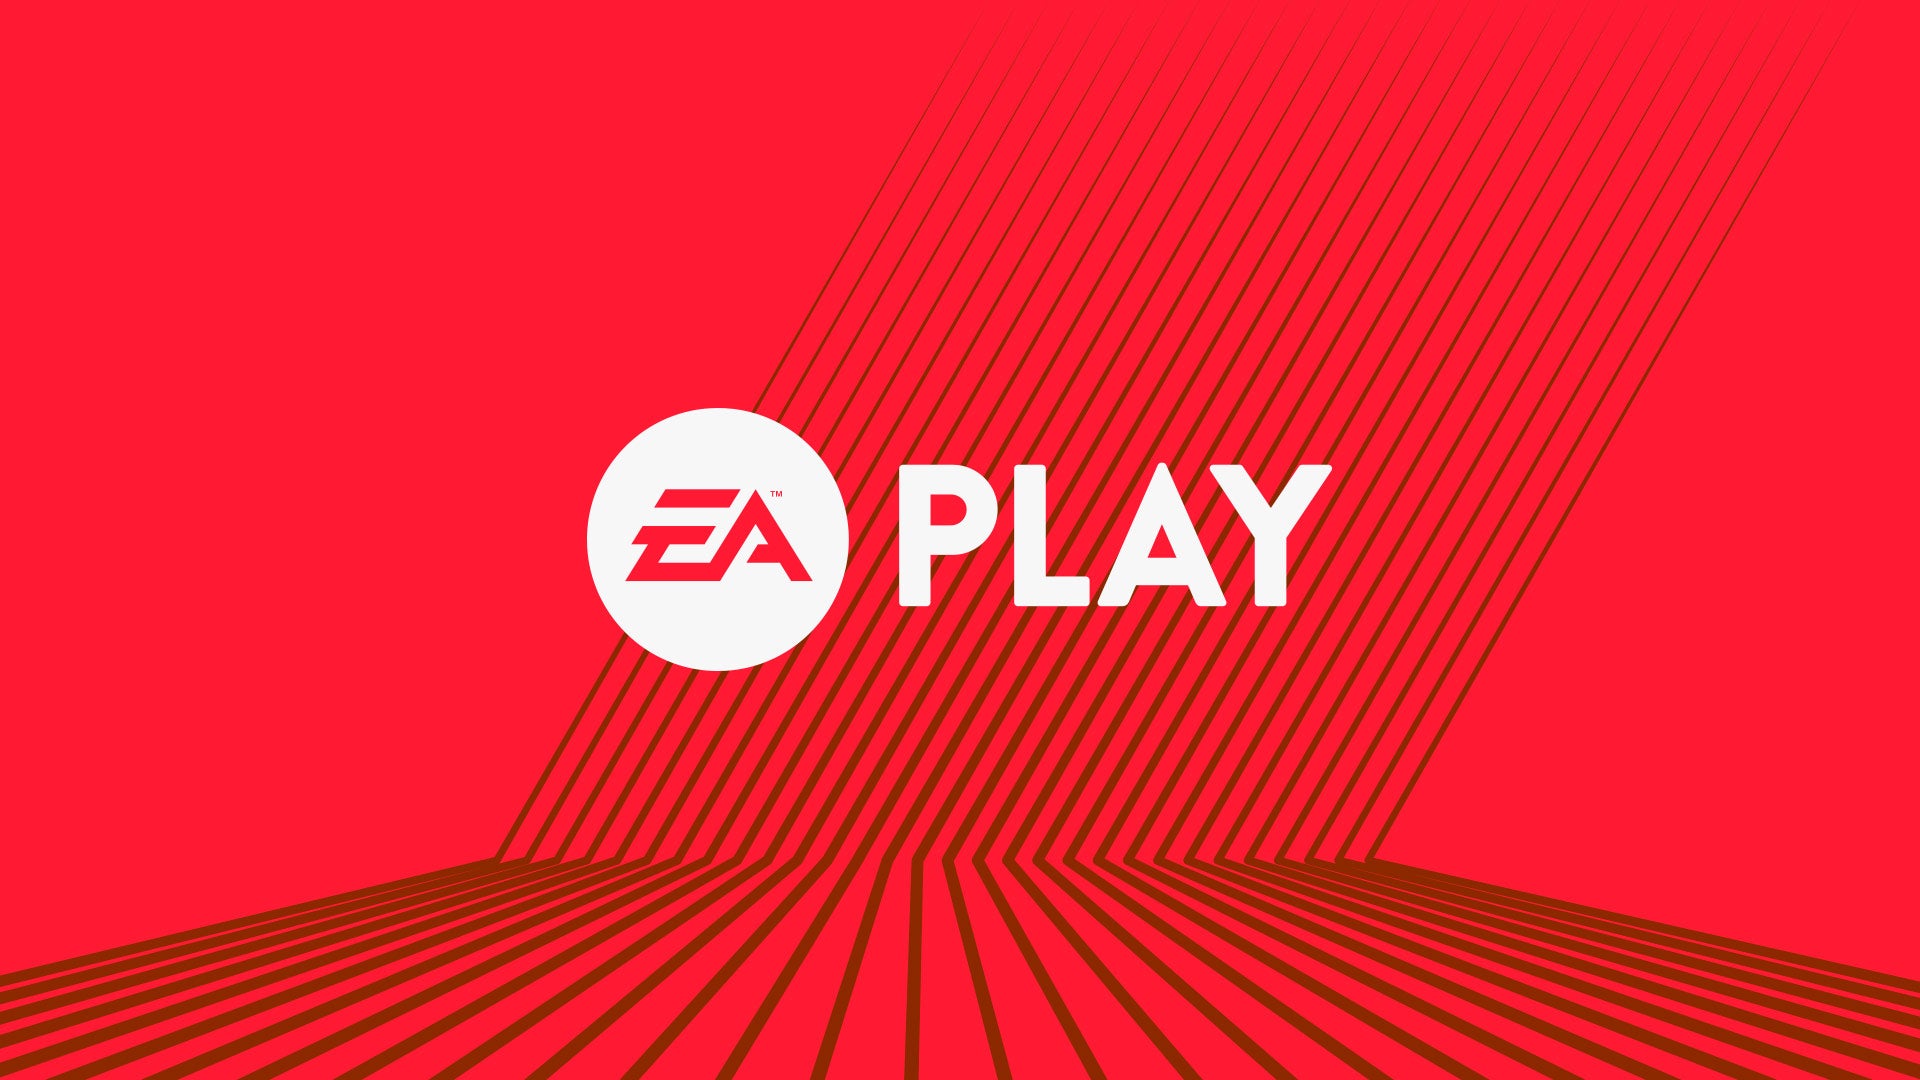 Image for EA Play will continue this year as a purely digital event